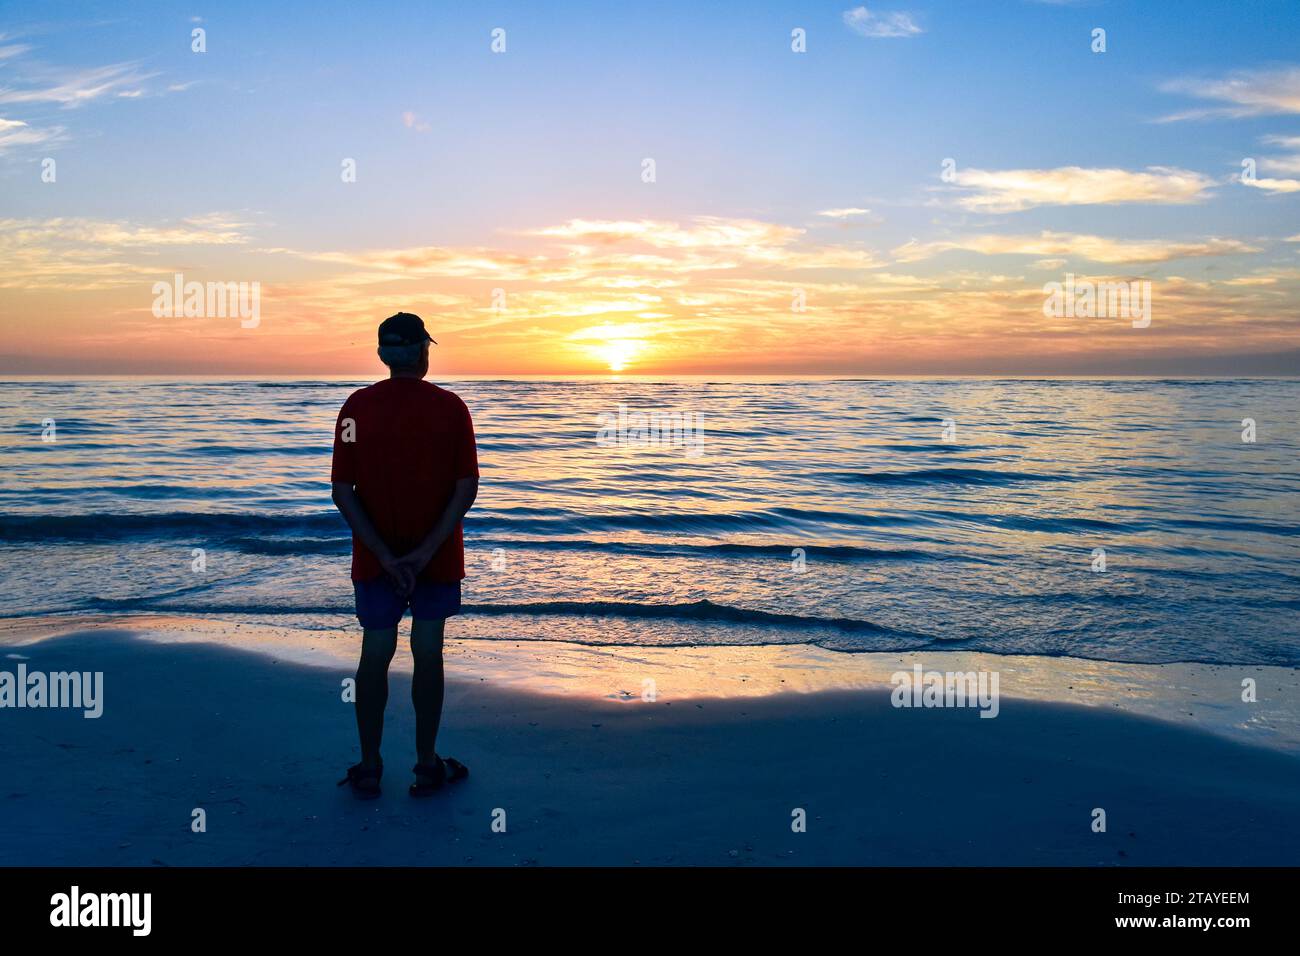 A senior man alone on the beach at sunset. Concept of solo travel, loneliness and isolation. Stock Photo